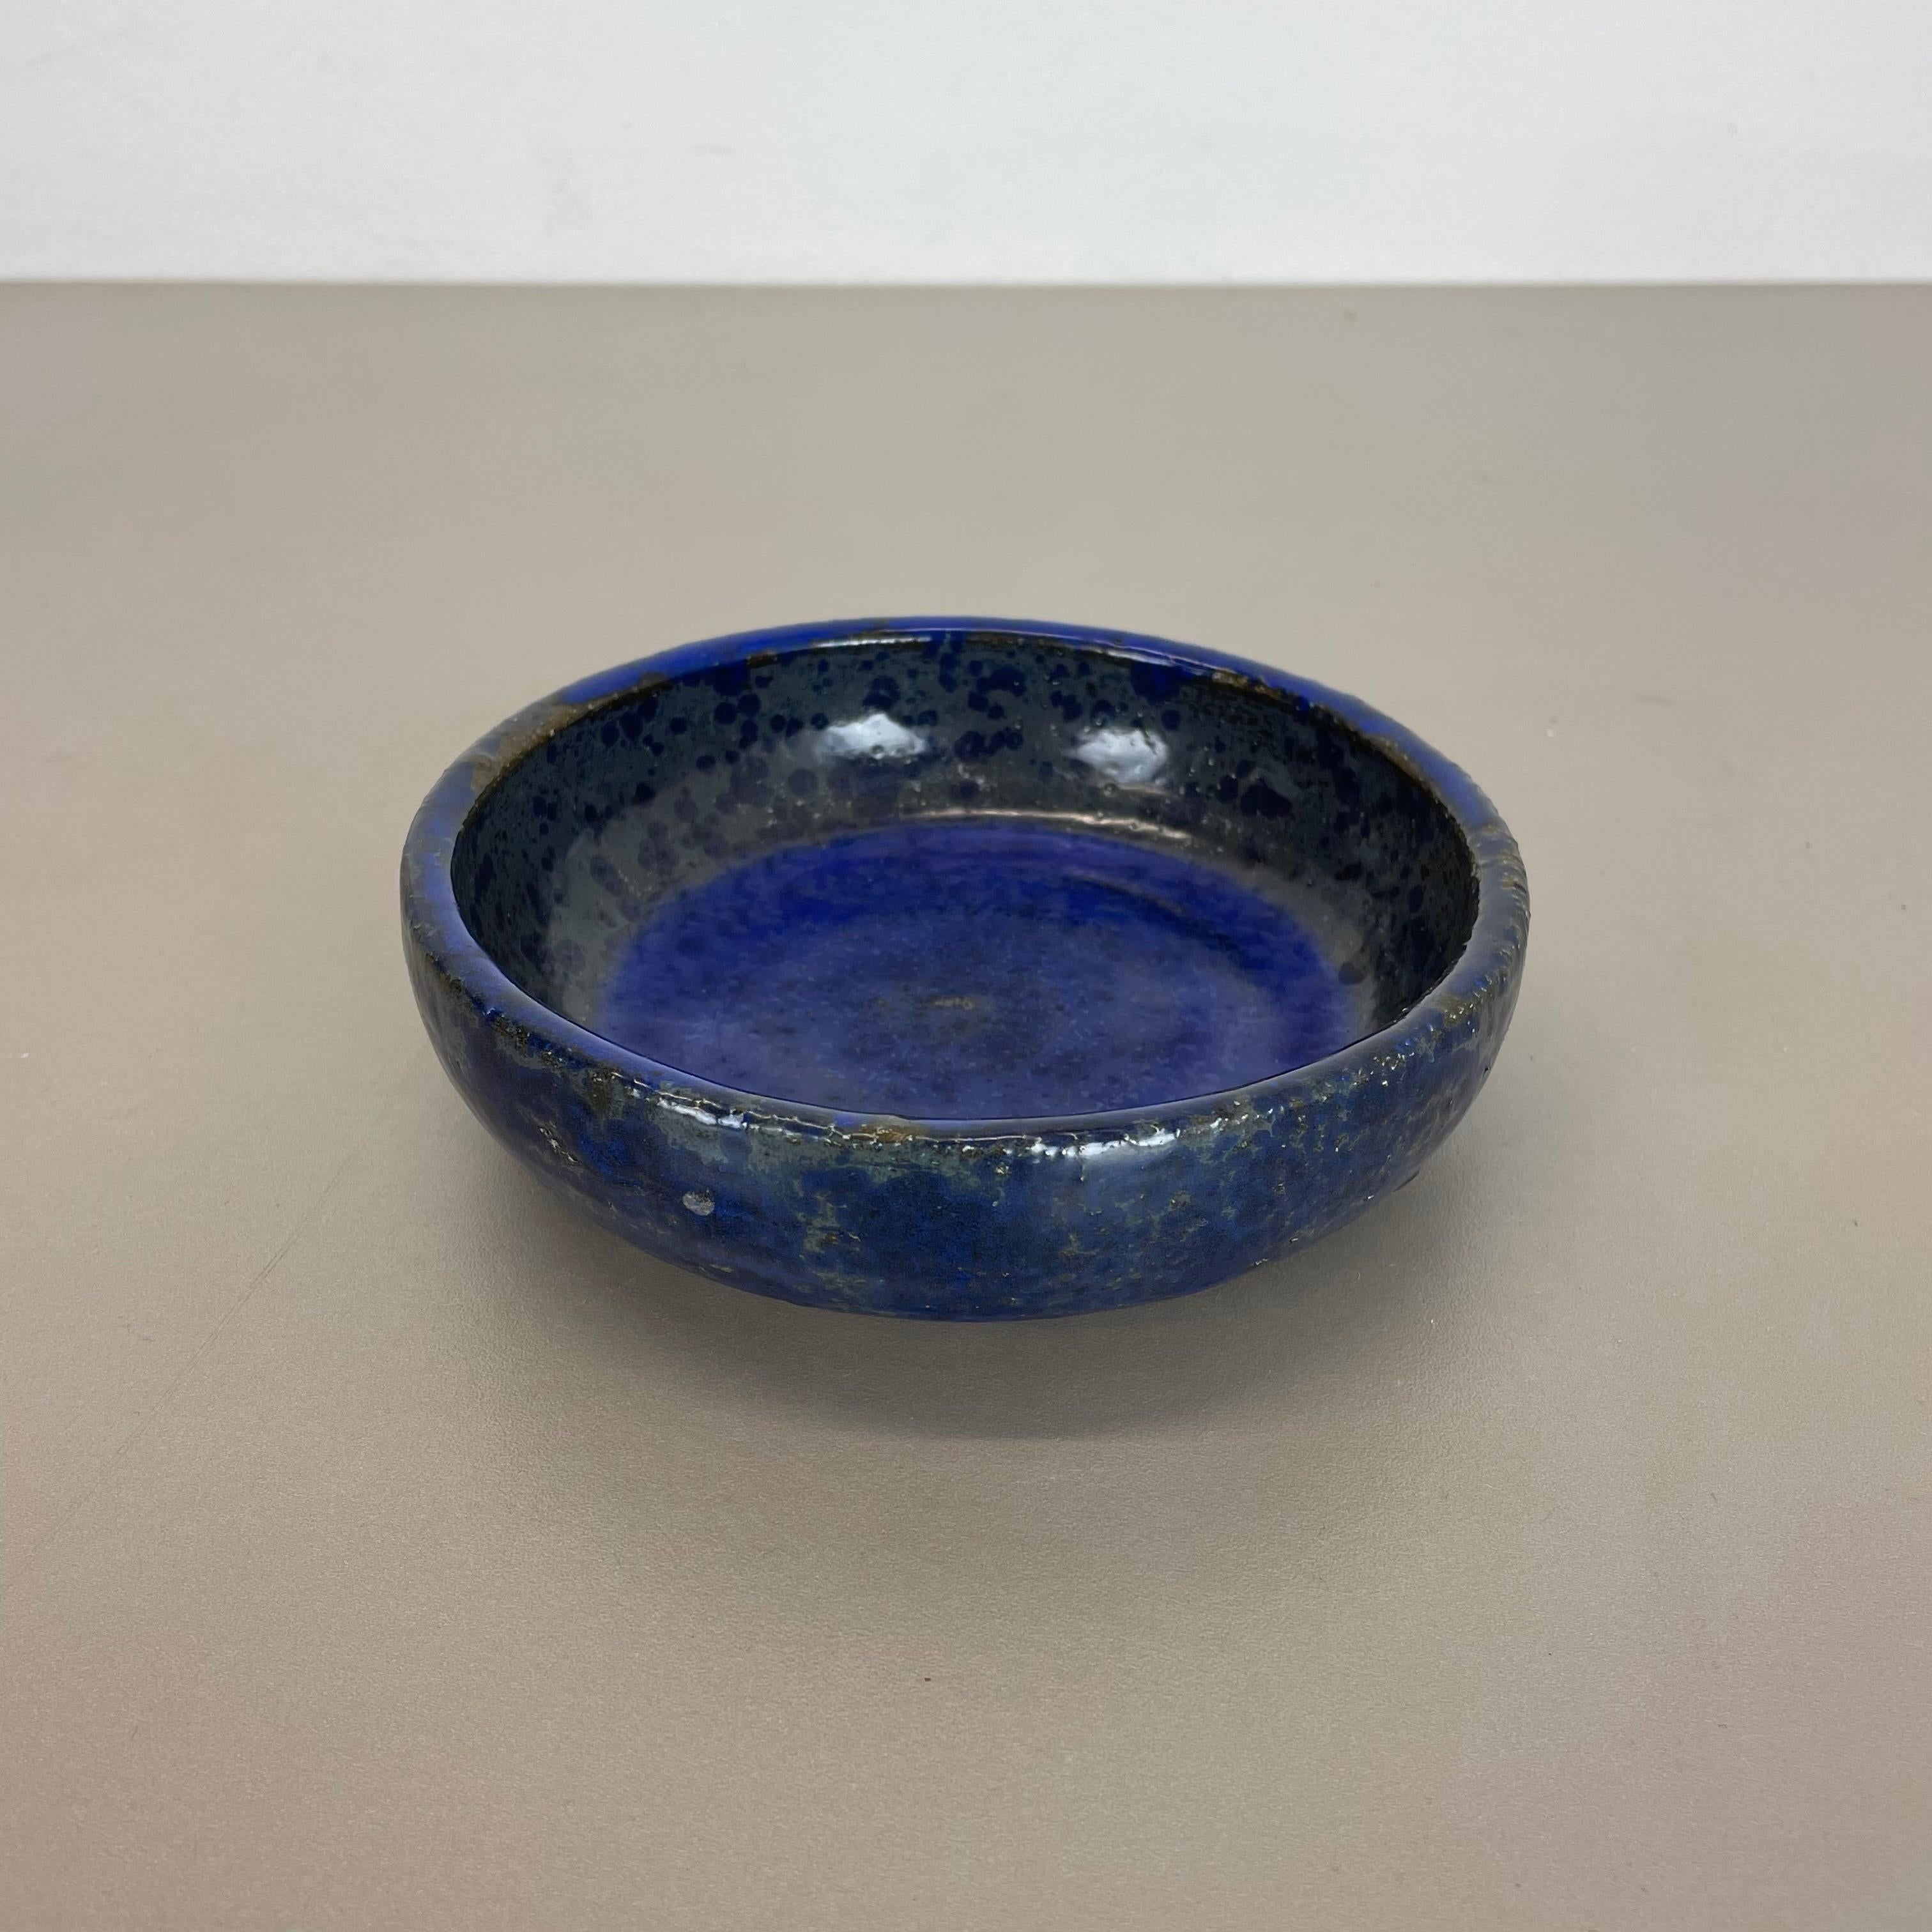 Ceramic Studio Pottery Bowl Shell Element by Gerhard Liebenthron, Germany, 1960s For Sale 7